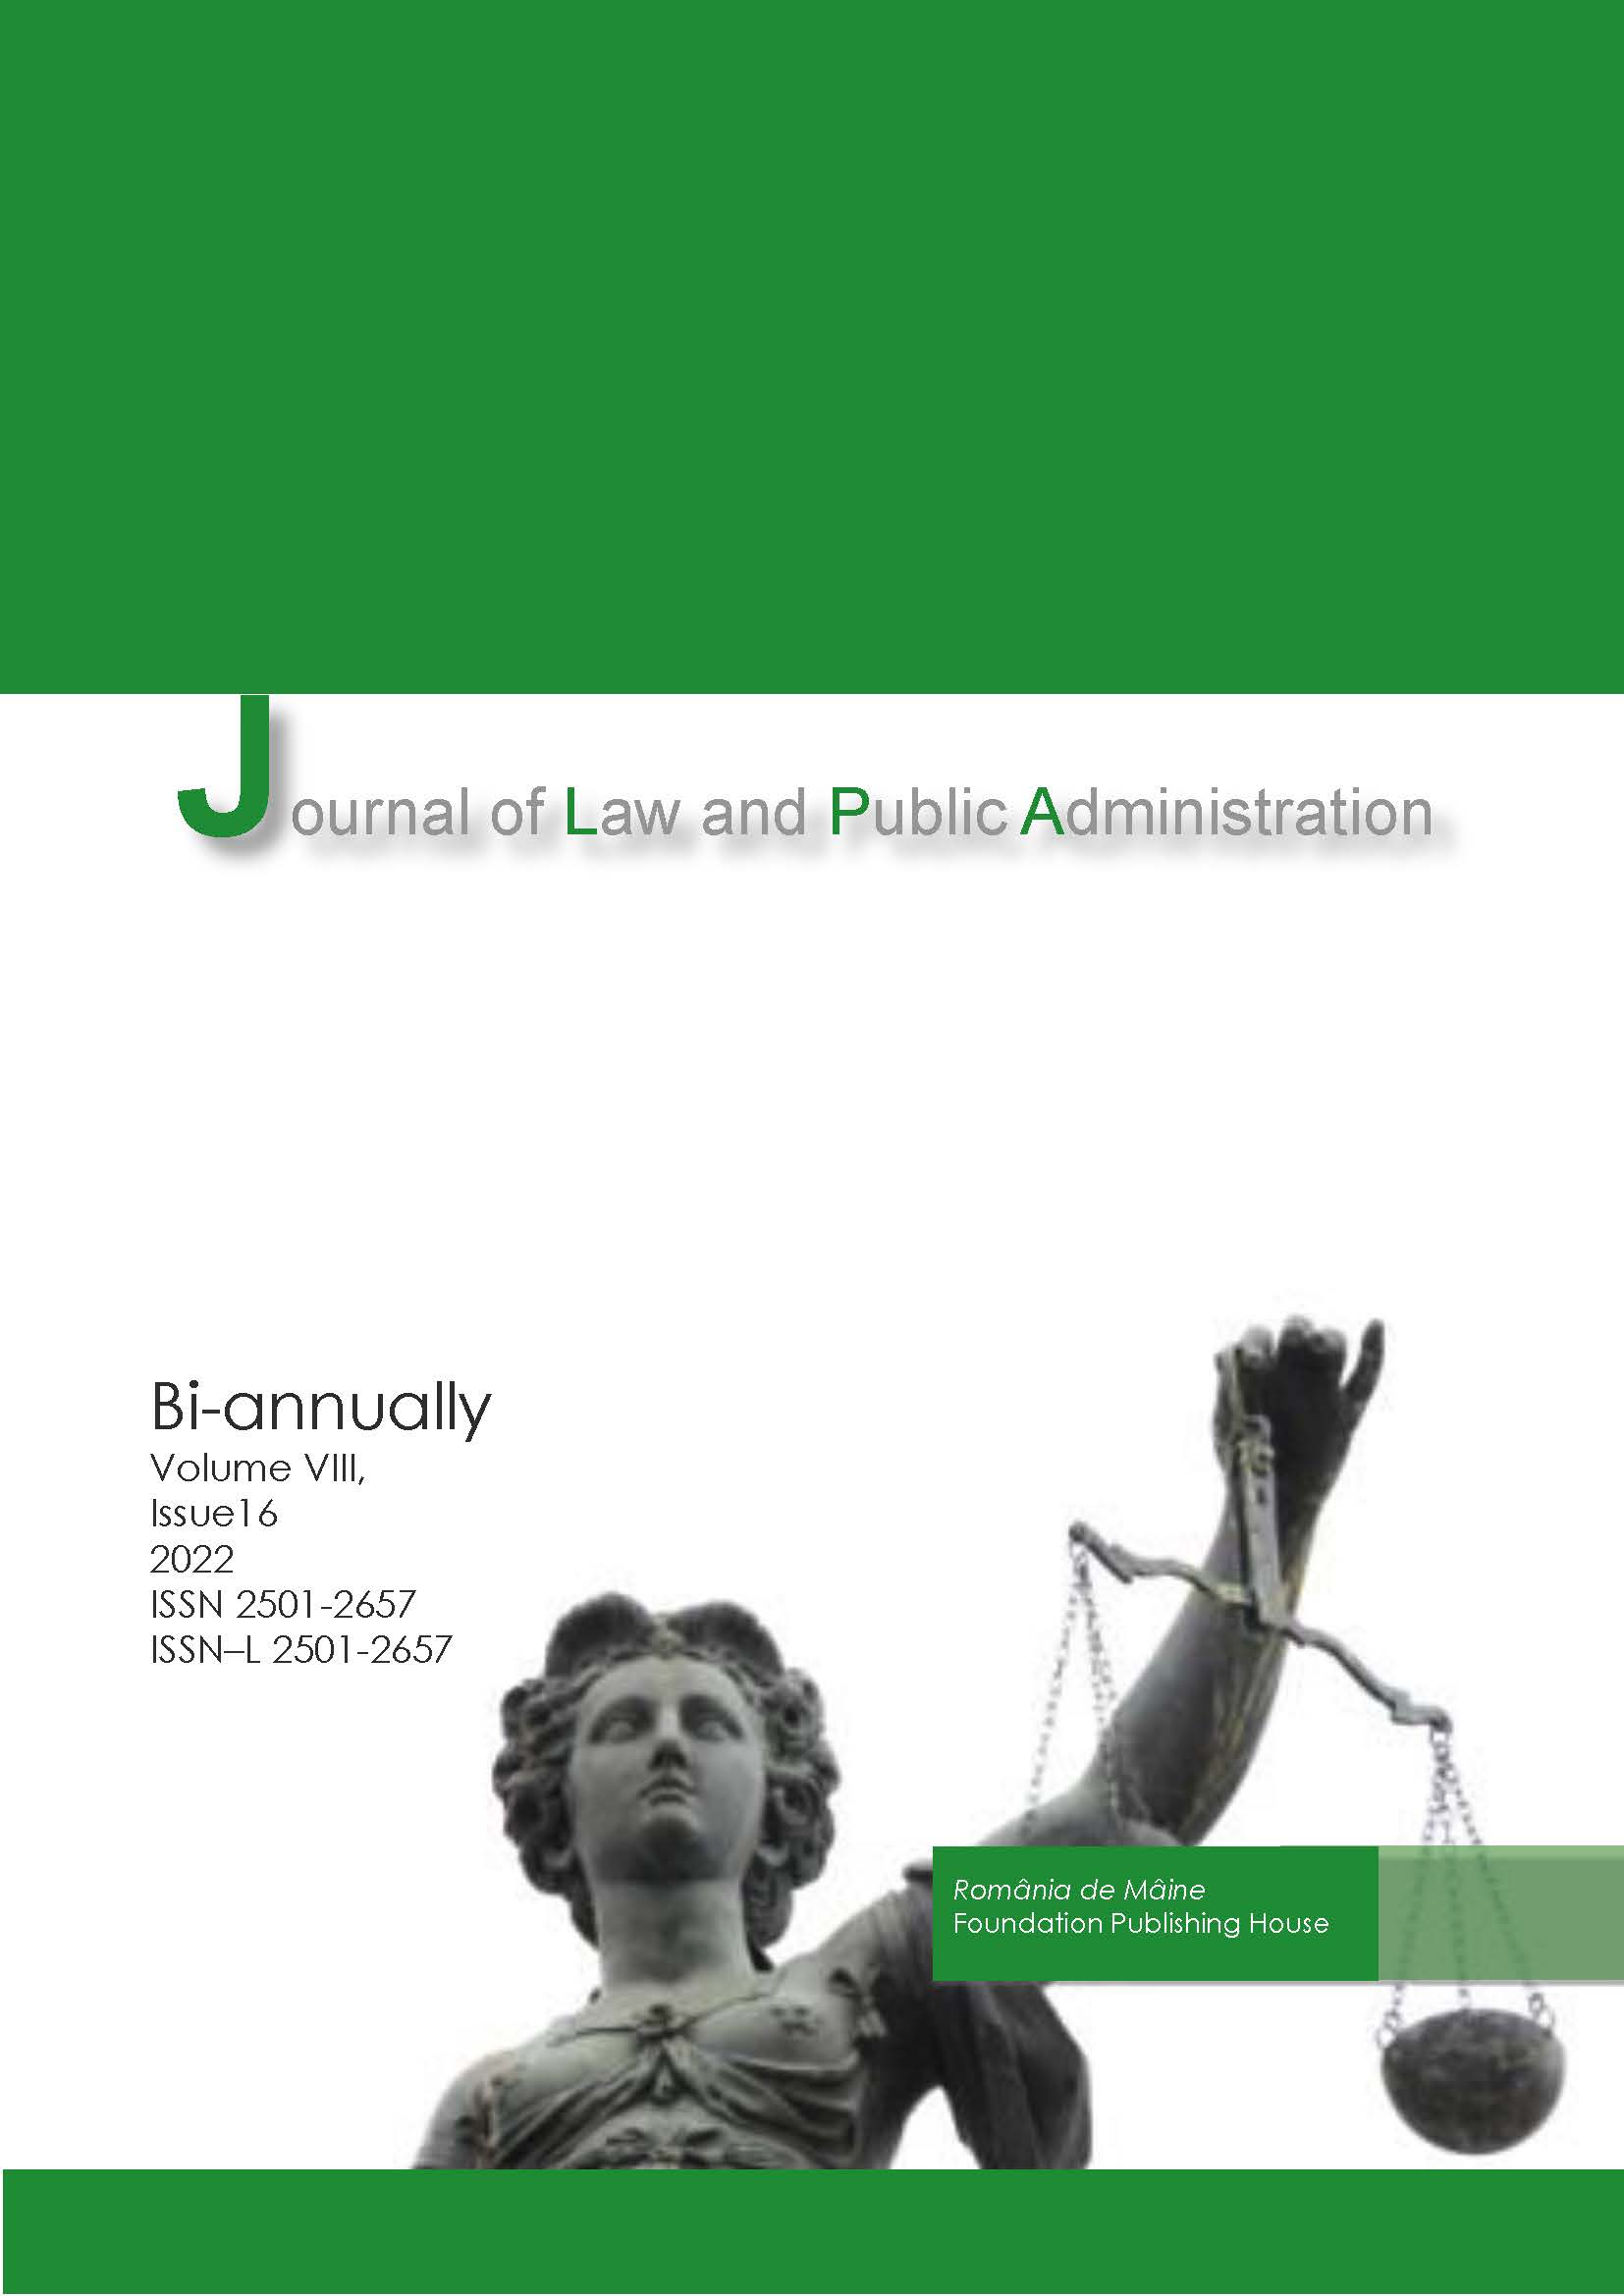 Aspects Regarding the Creation of the Internal Legal Framework for the
Transposition of Directives and Application of the Regulations and Decisions of the European Union in Romania Cover Image